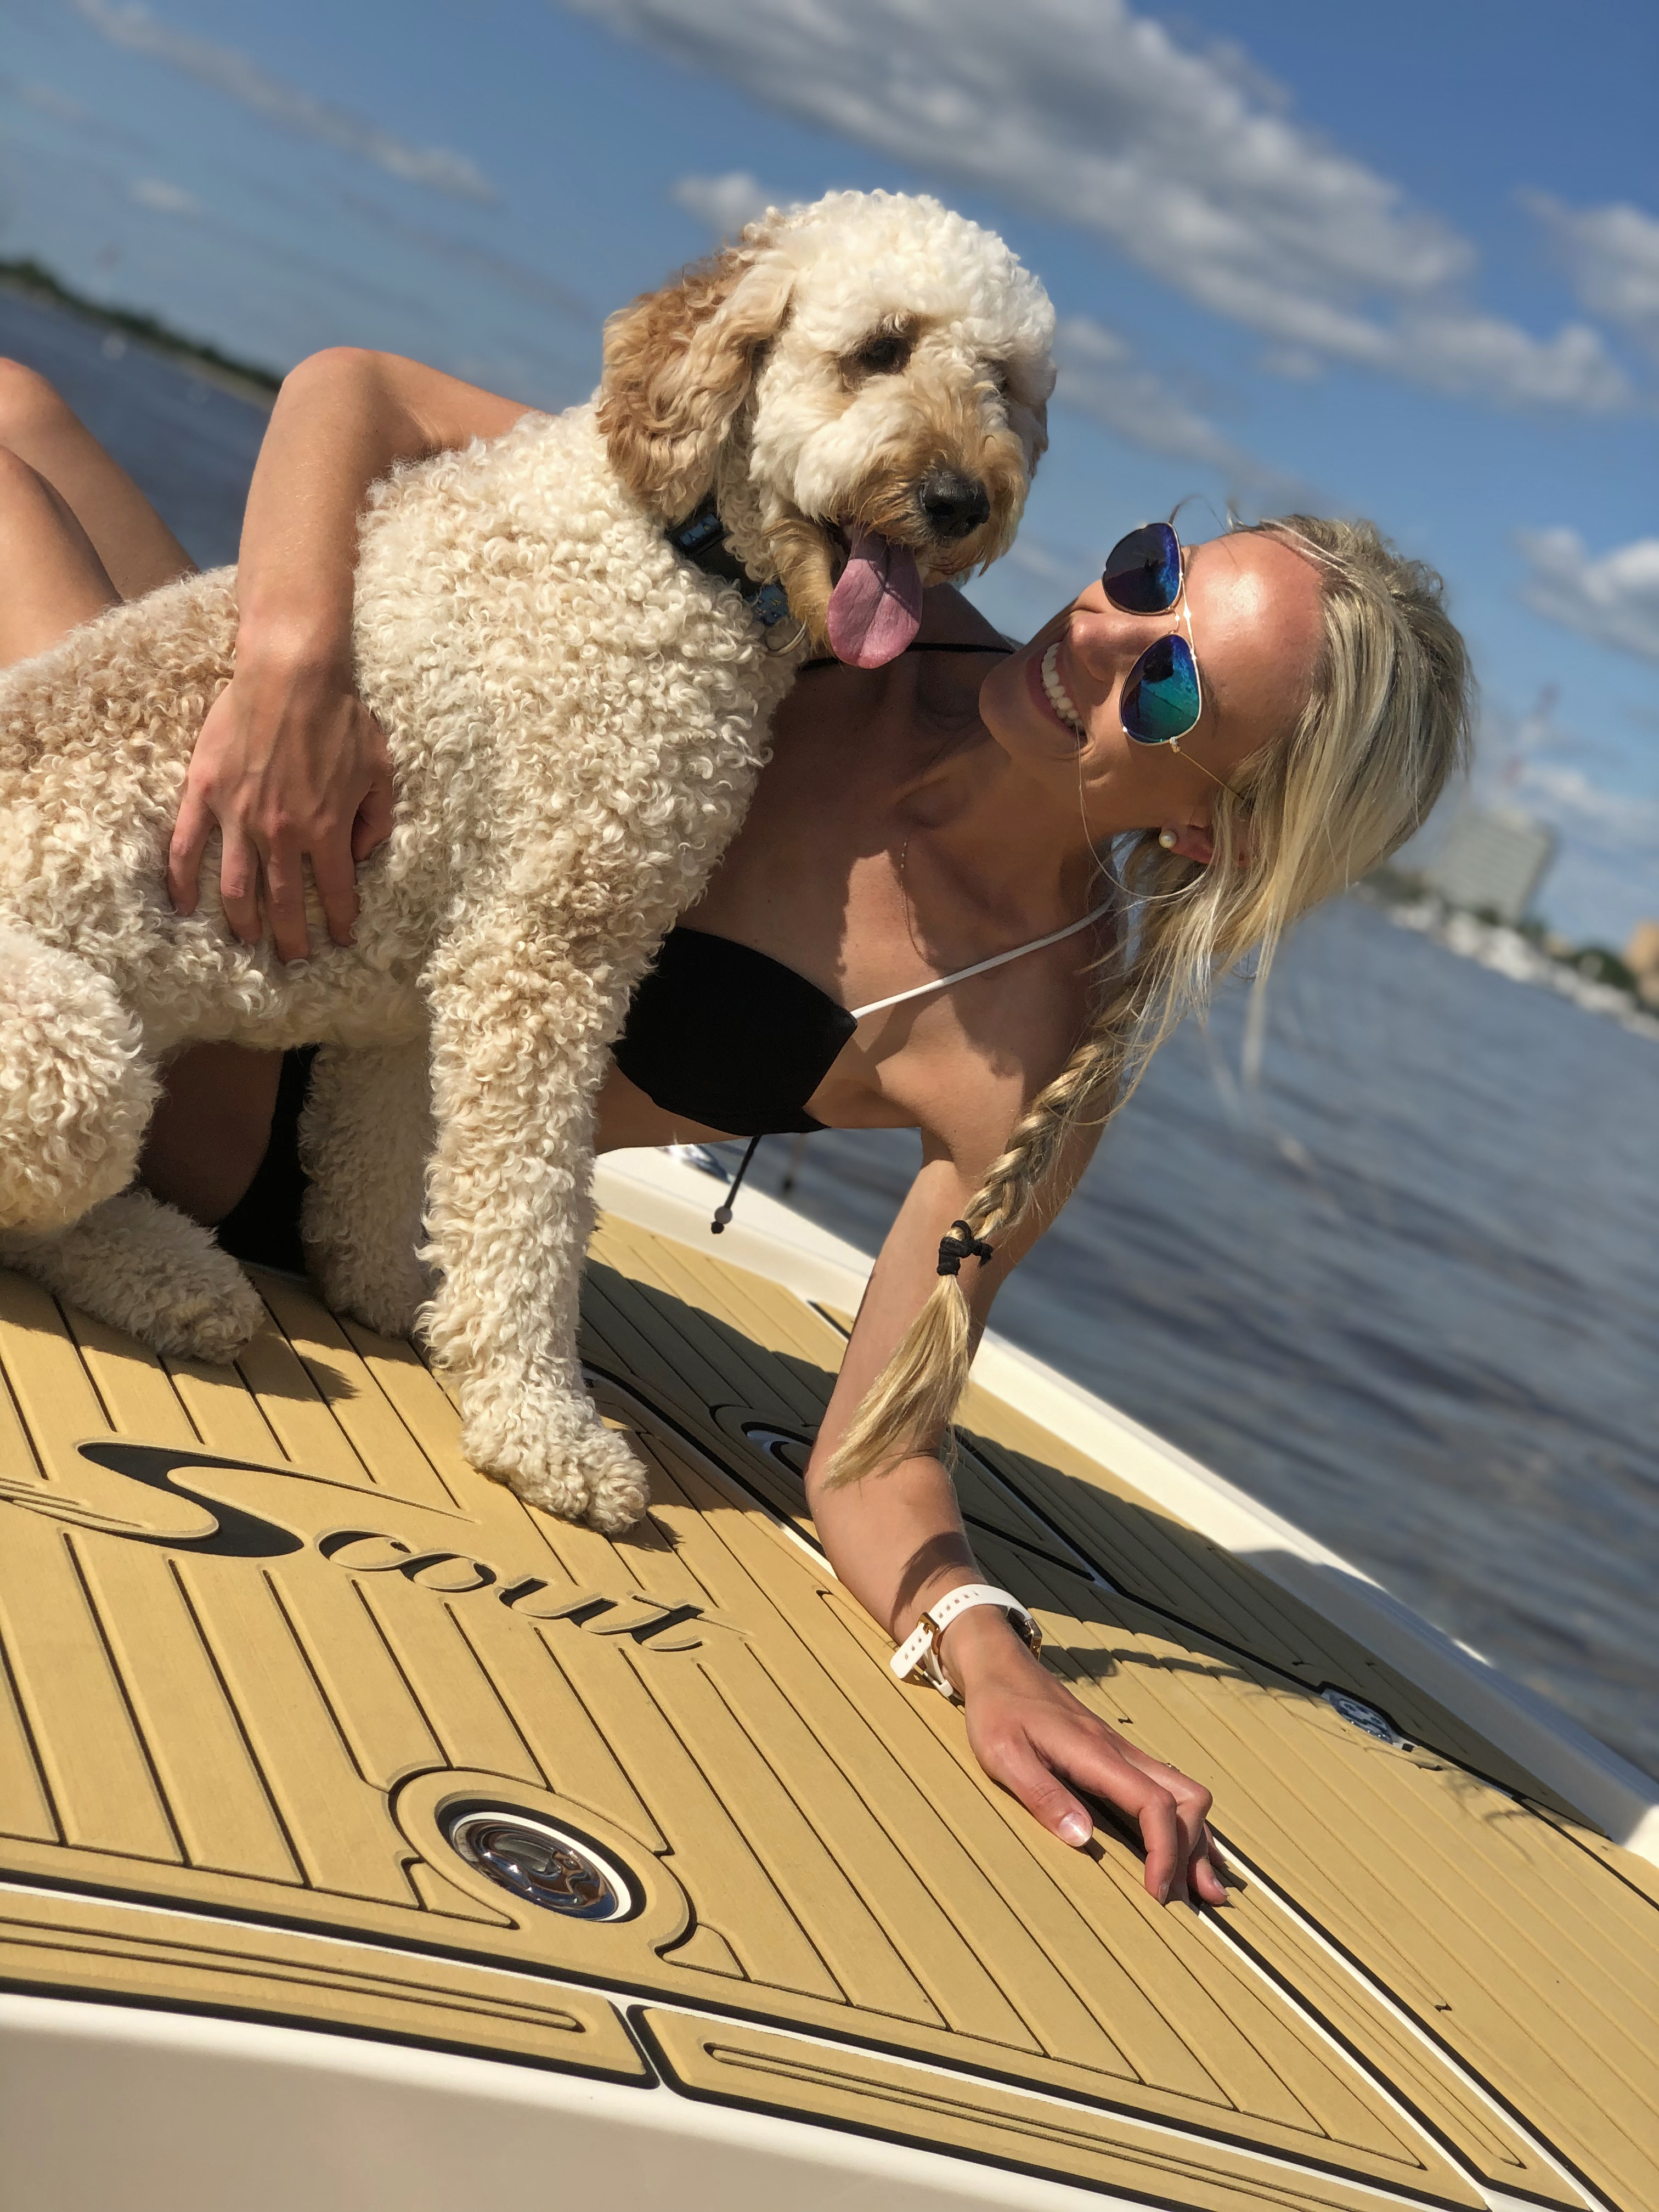 SeaDek Dogs love SeaDek Marine Products and our comfortable nonslip flooring. Happy National Dog Day!